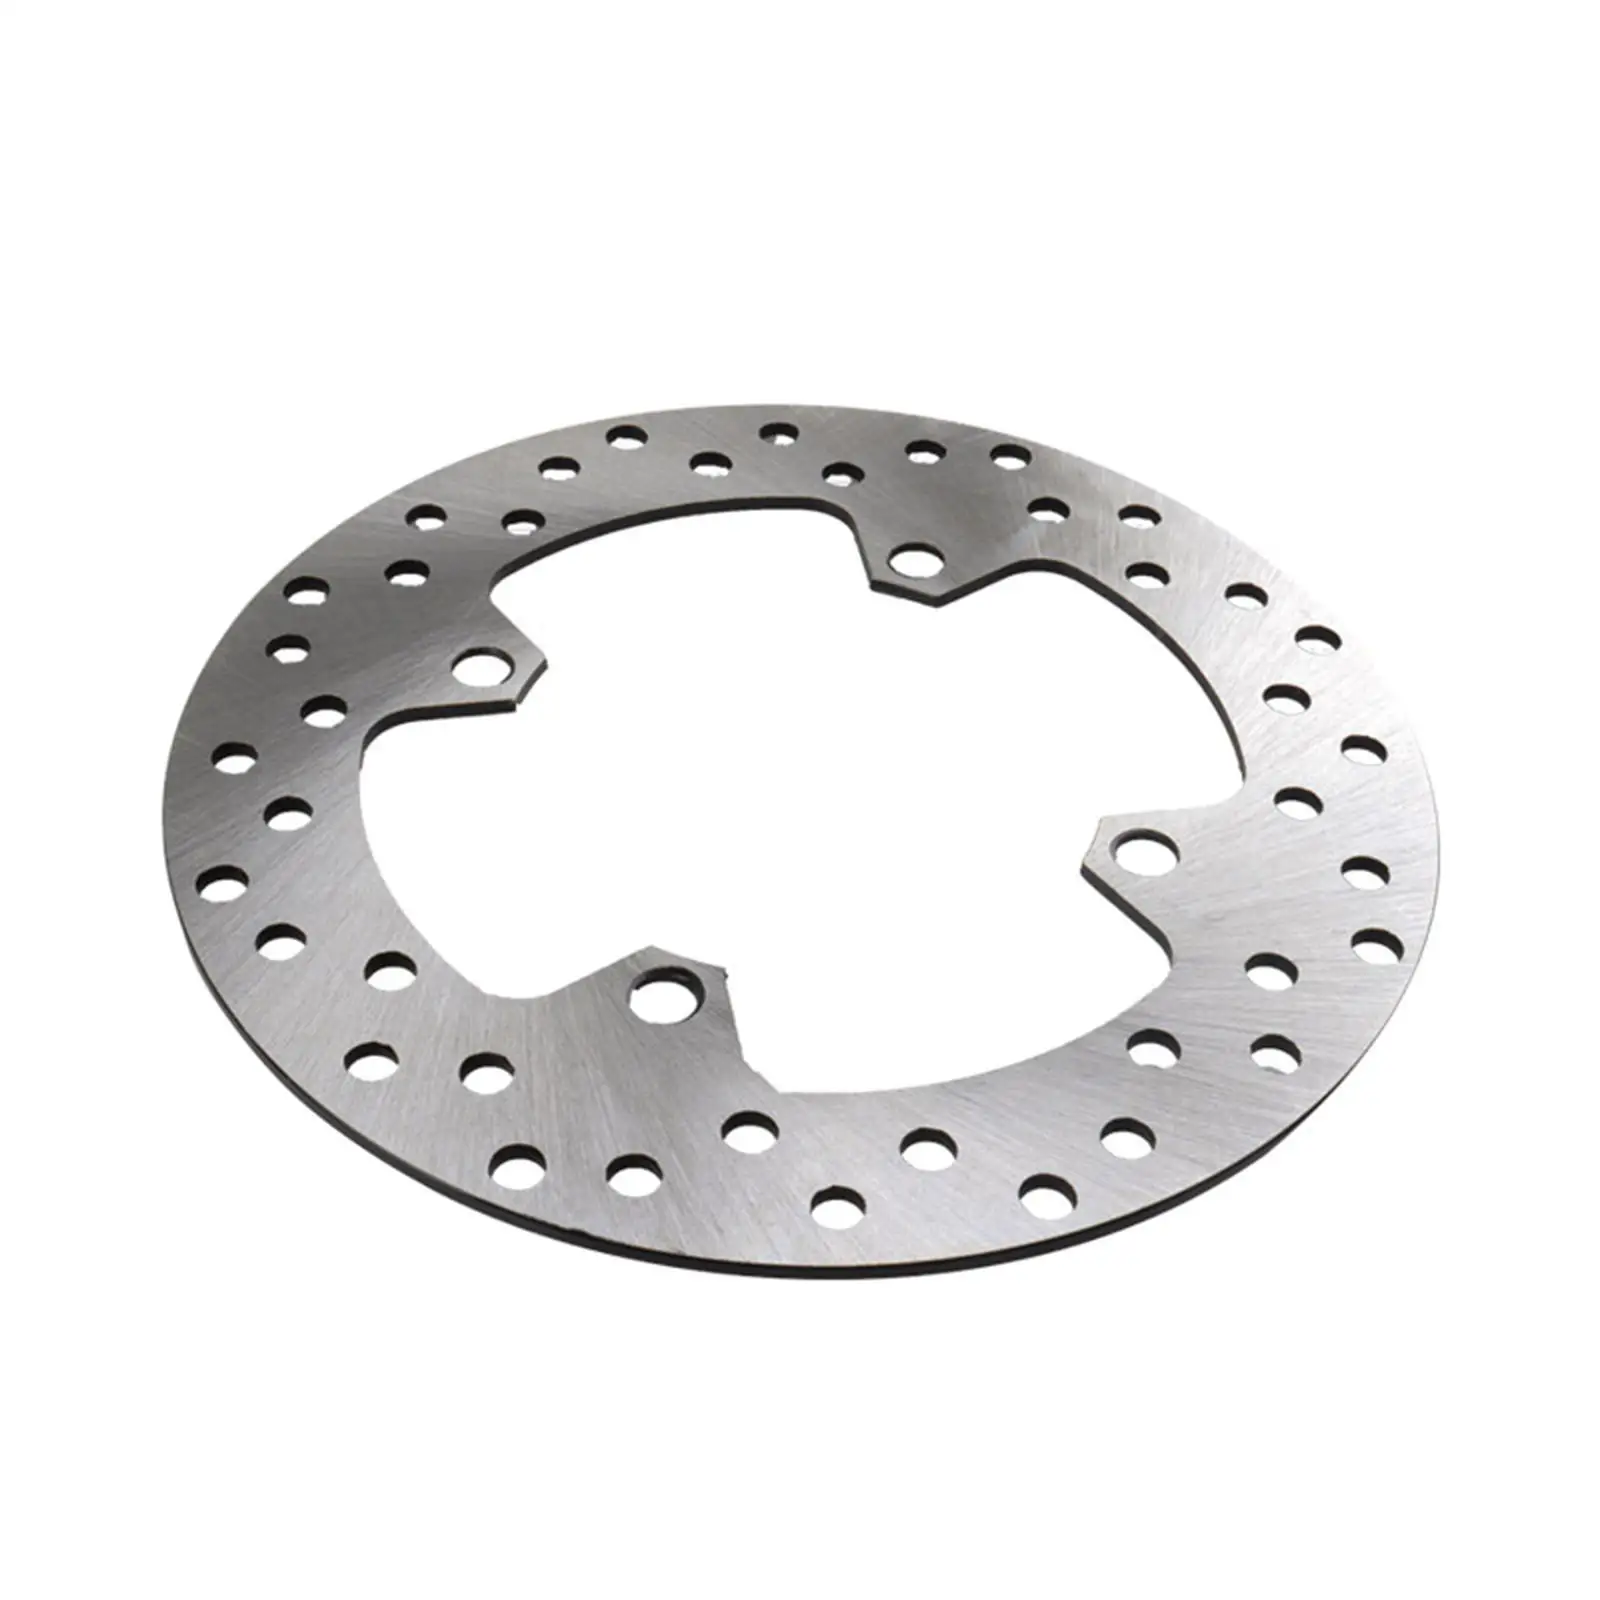 Brake Disc Rotor Direct Replaces Wear Resistant Easy Installation Spare Parts for Honda CBR125R Xlv Varasx125 XR400 TRX400x